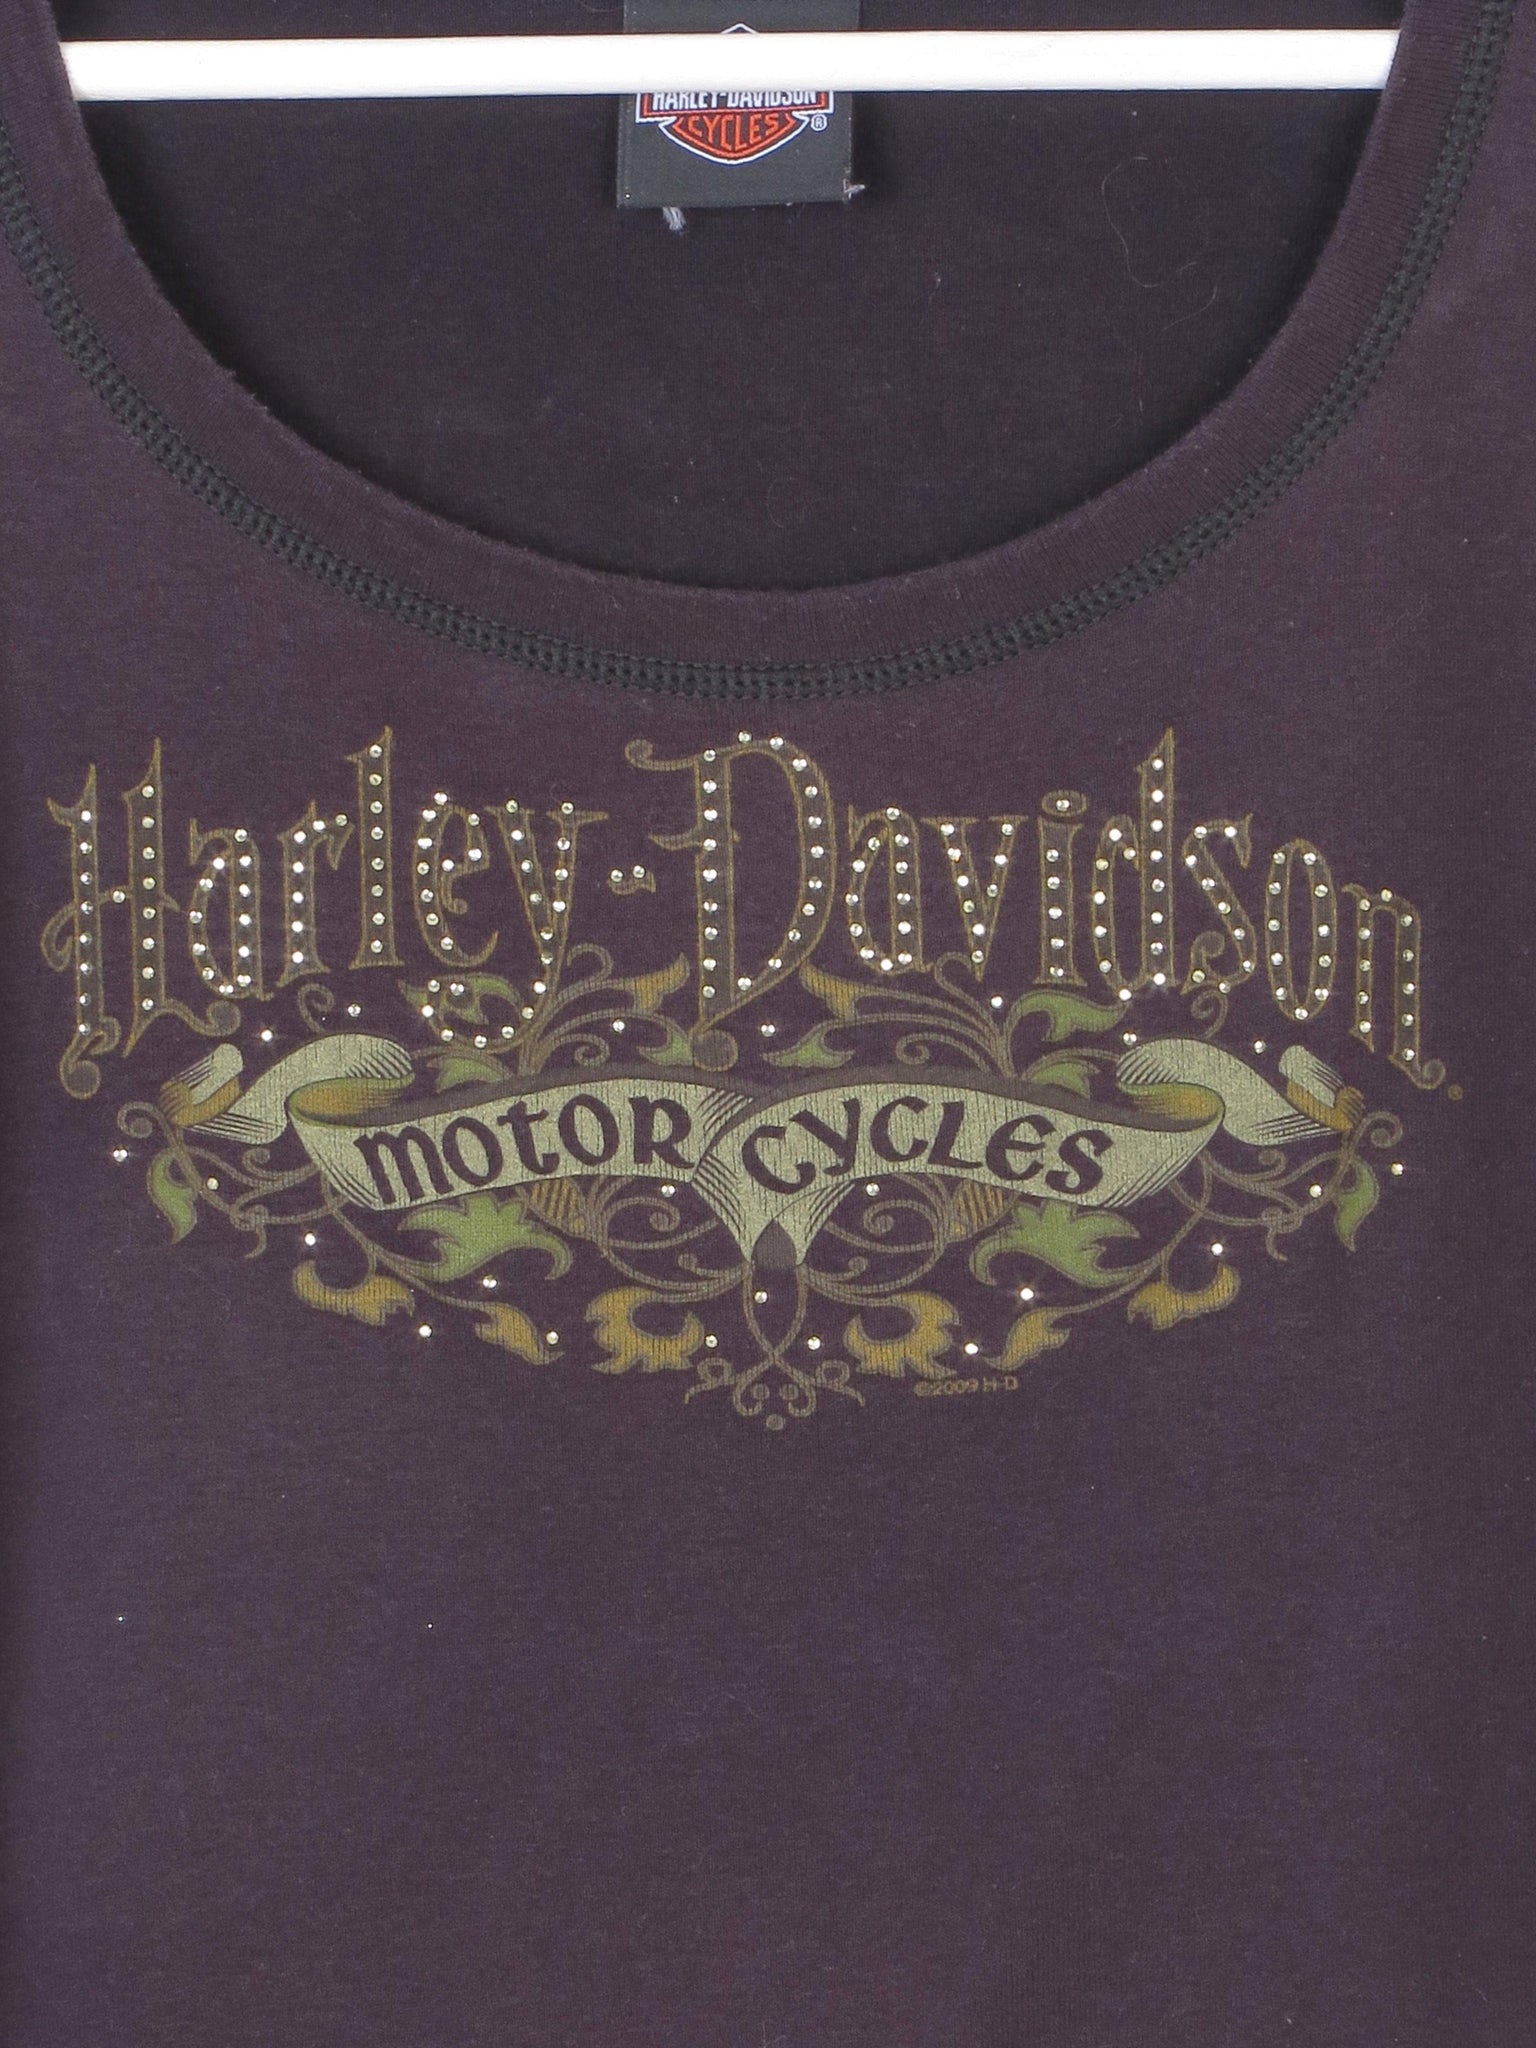 Harley Davidson Fitted Ladies T-shirt S - The Harlequin